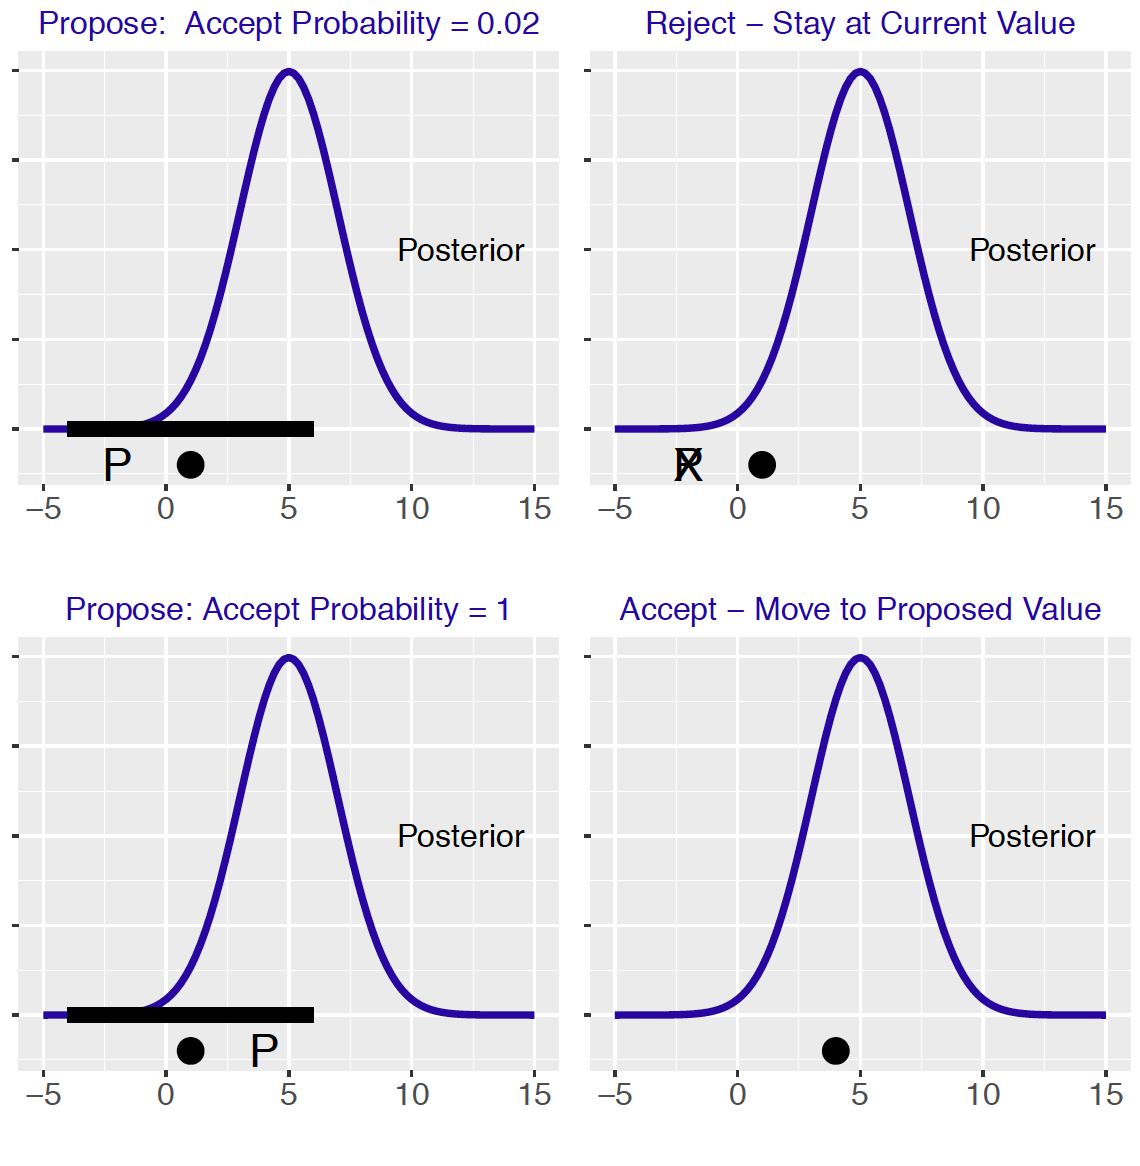 Illustration of the Metropolis algorithm.  The left graphs show the proposal region and two possible proposal values and the right graphs show the result of either accepting or rejecting the proposal.